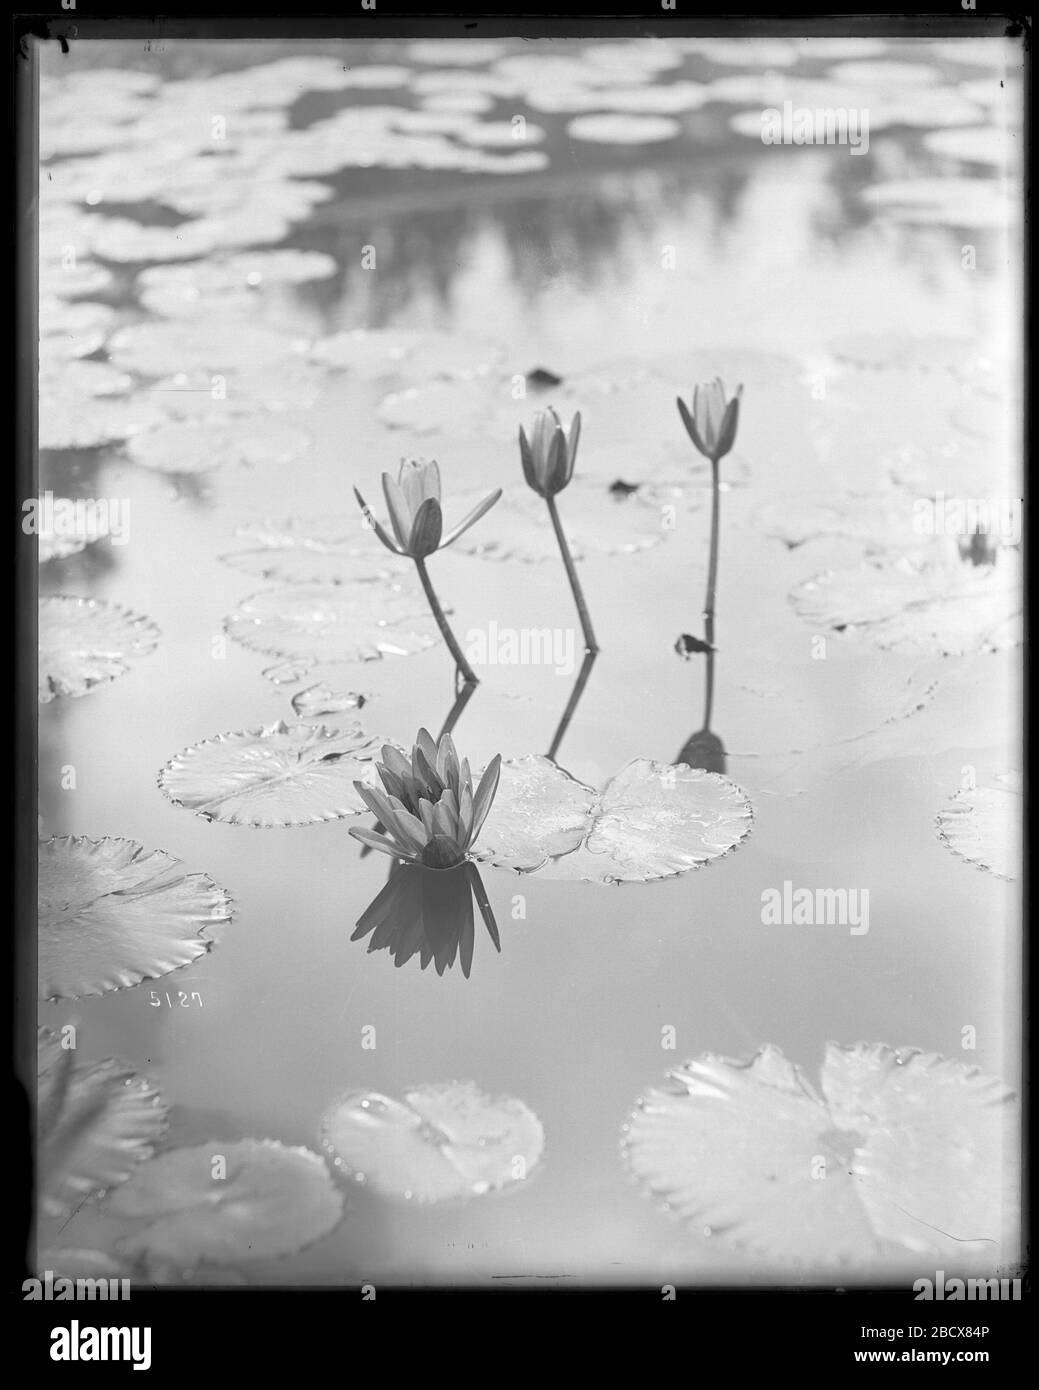 Water Lilies in United States Fish Commission Hatchery Pond. U.S. Fish Commission fish hatchery pond for the production of carp, golden ide, and tench, located near the grounds of the Washington Monument.Smithsonian Institution Archives, Acc. 11-007, Box 026, Image No. MNH-5127 Stock Photo